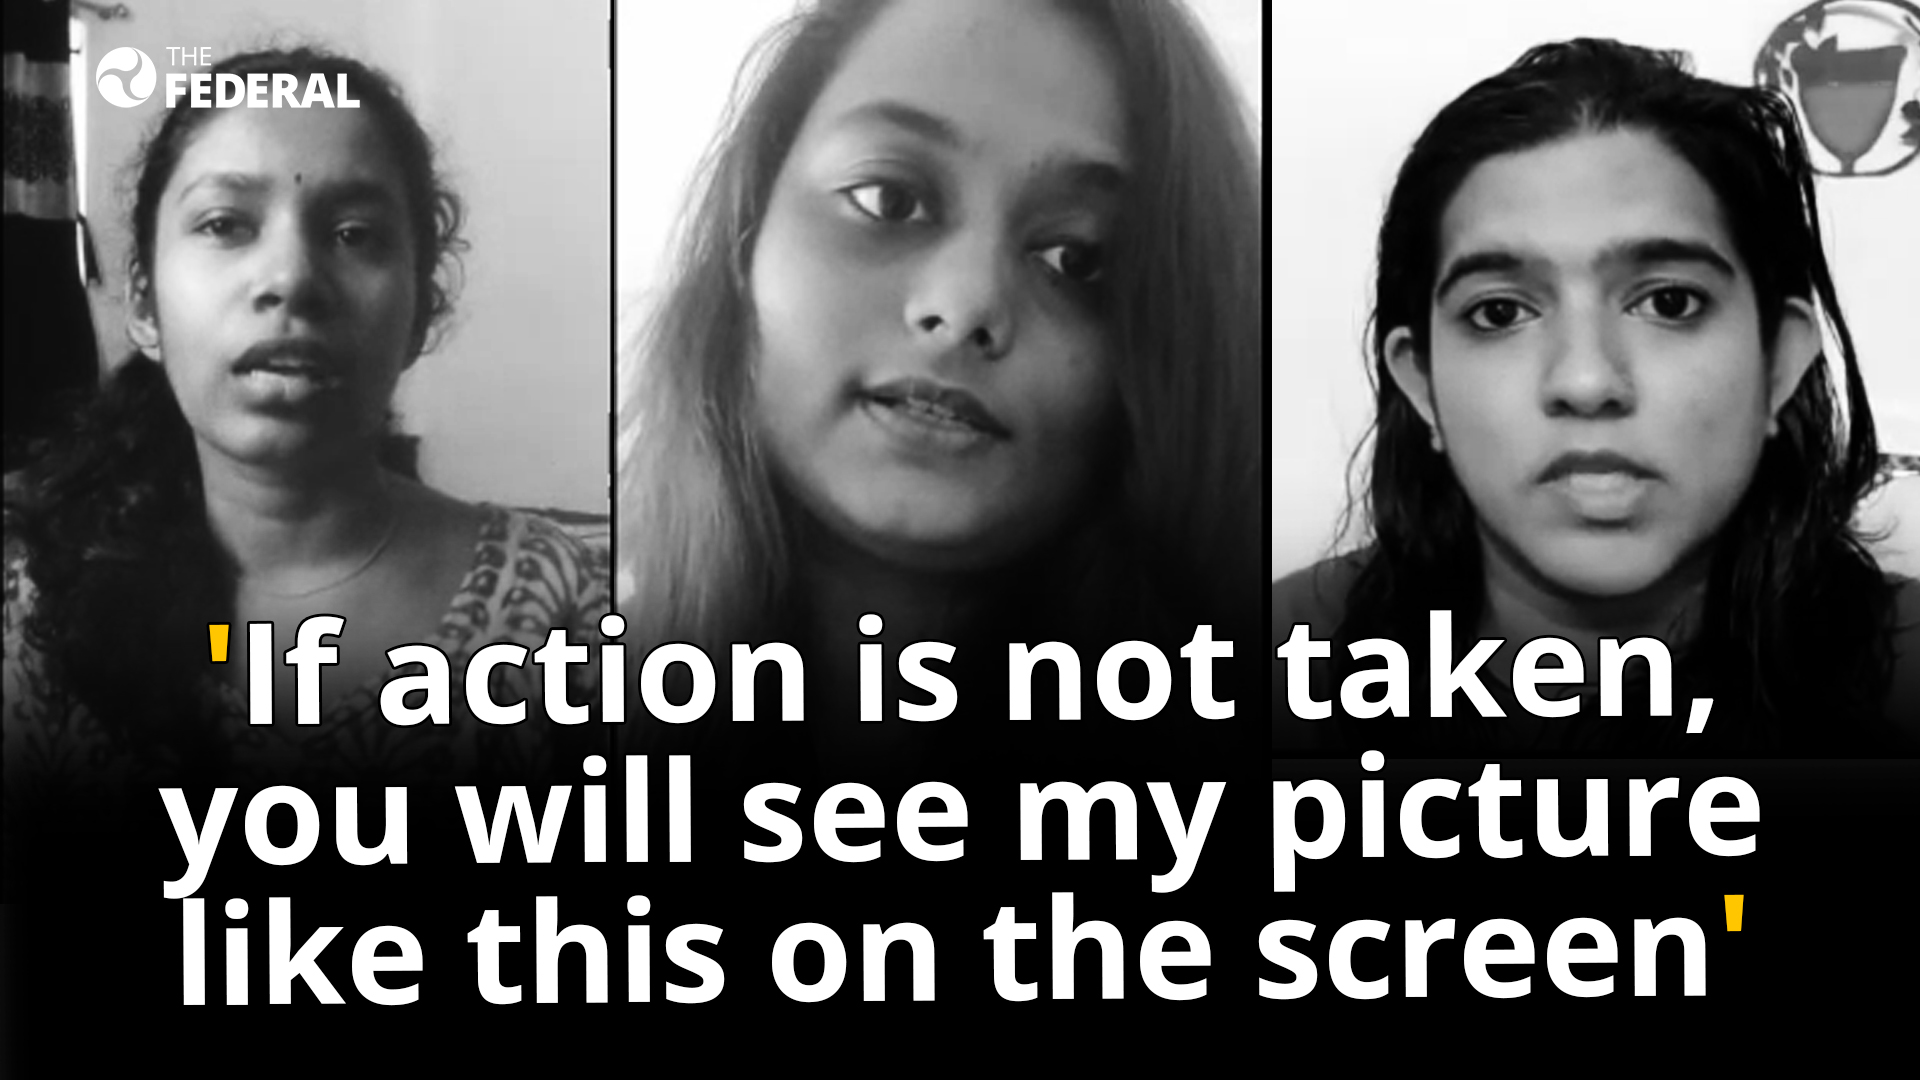 Posting black and white pics not enough: Women speak up on #ChallengeAccepted campaign